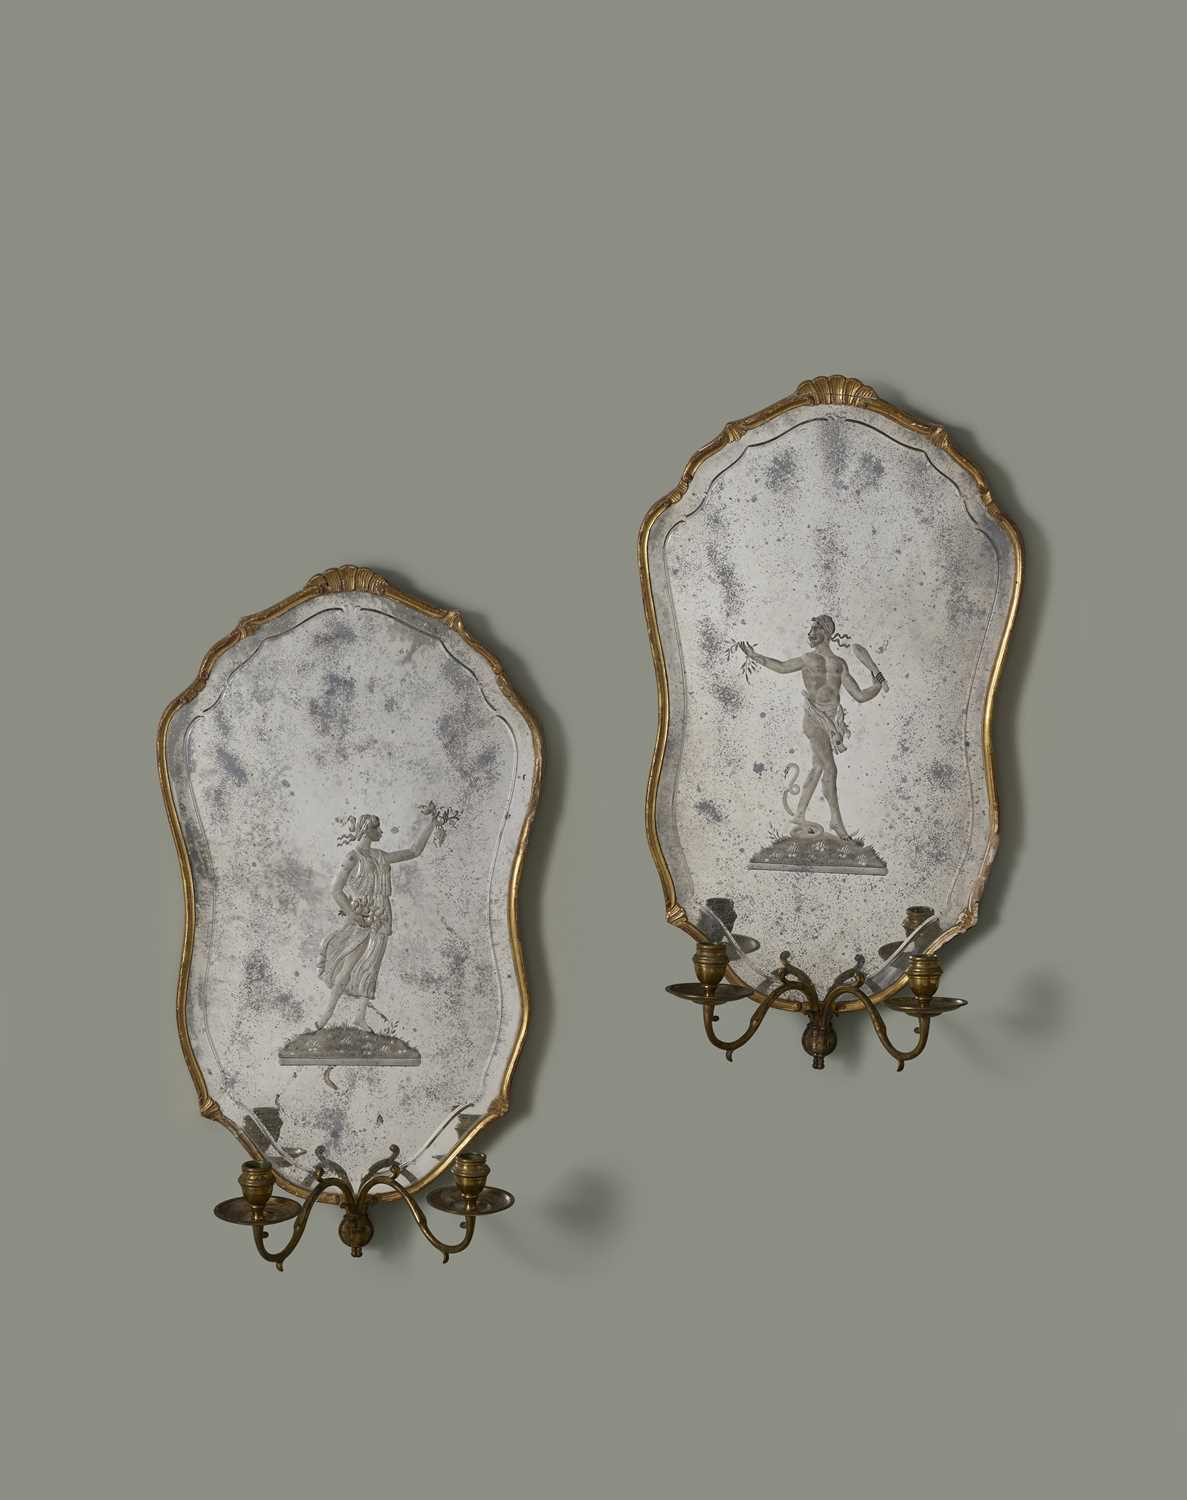 A PAIR OF ITALIAN GILTWOOD GIRANDOLE MIRRORS VENETIAN, IN ROCOCO STYLE, 19TH CENTURY each with a - Image 2 of 2